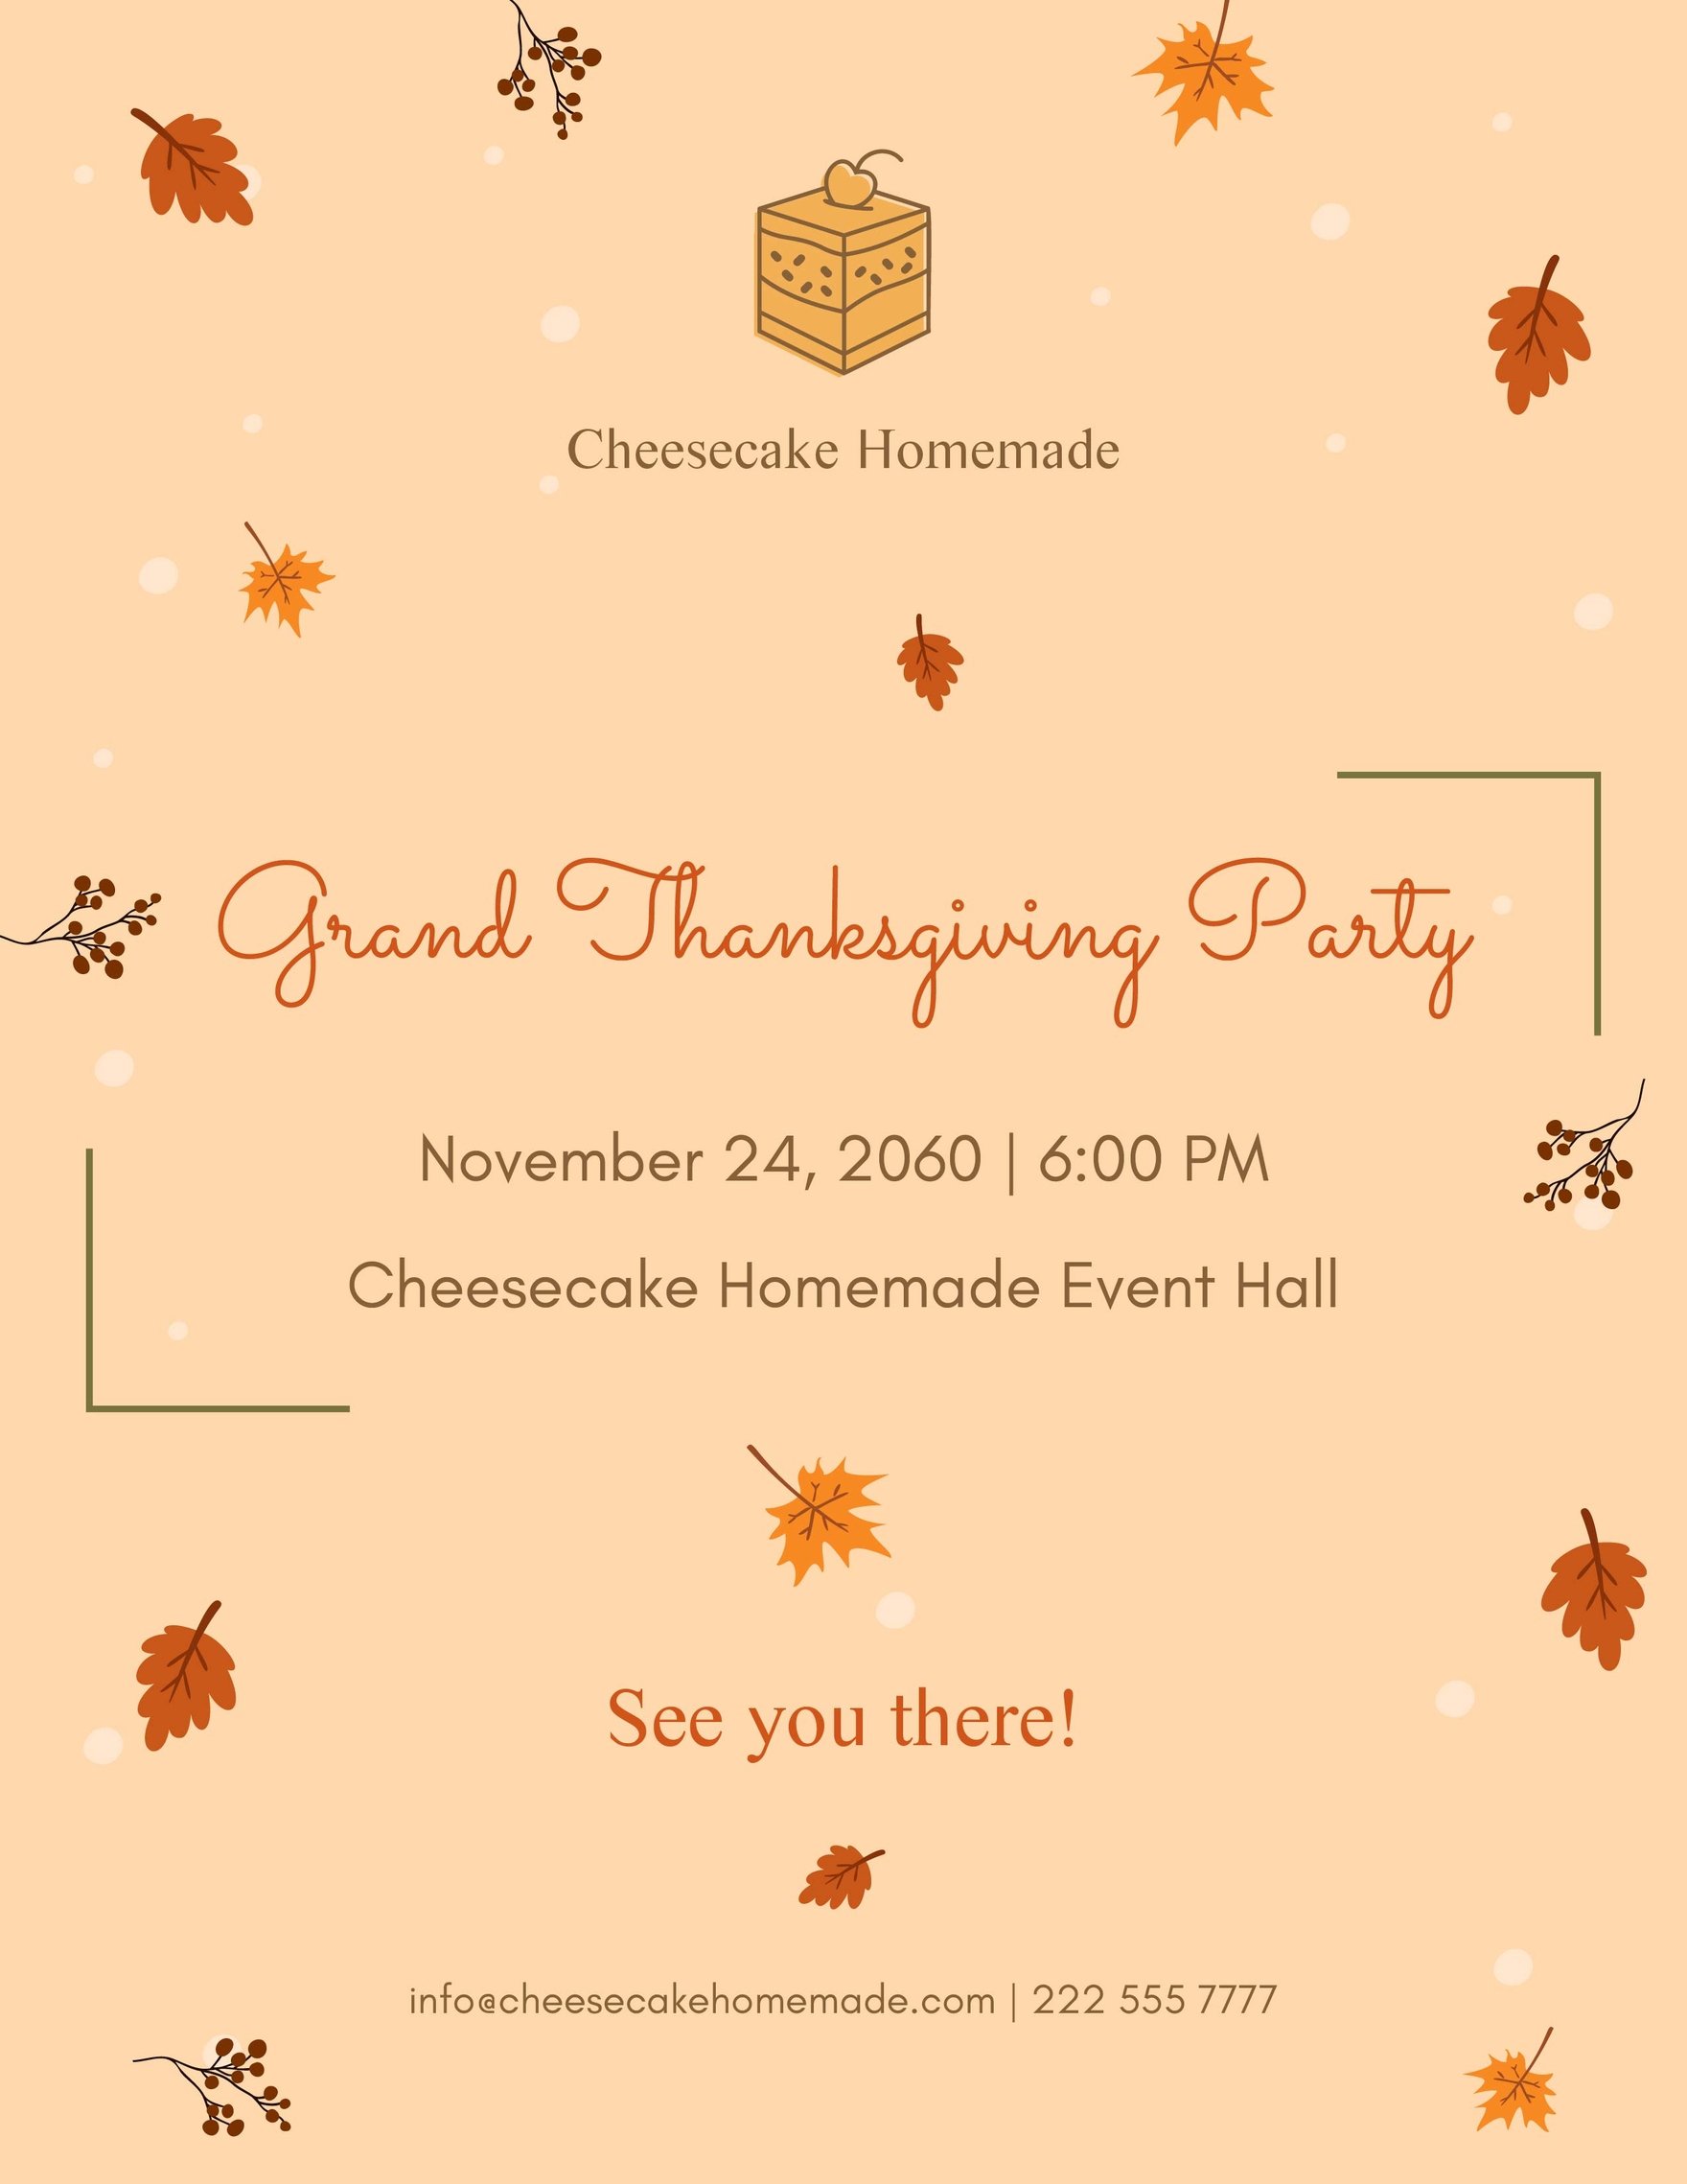 Free Party Thanksgiving Day Flyer in Word, Google Docs, Illustrator, PSD, Apple Pages, EPS, SVG, JPG, PNG